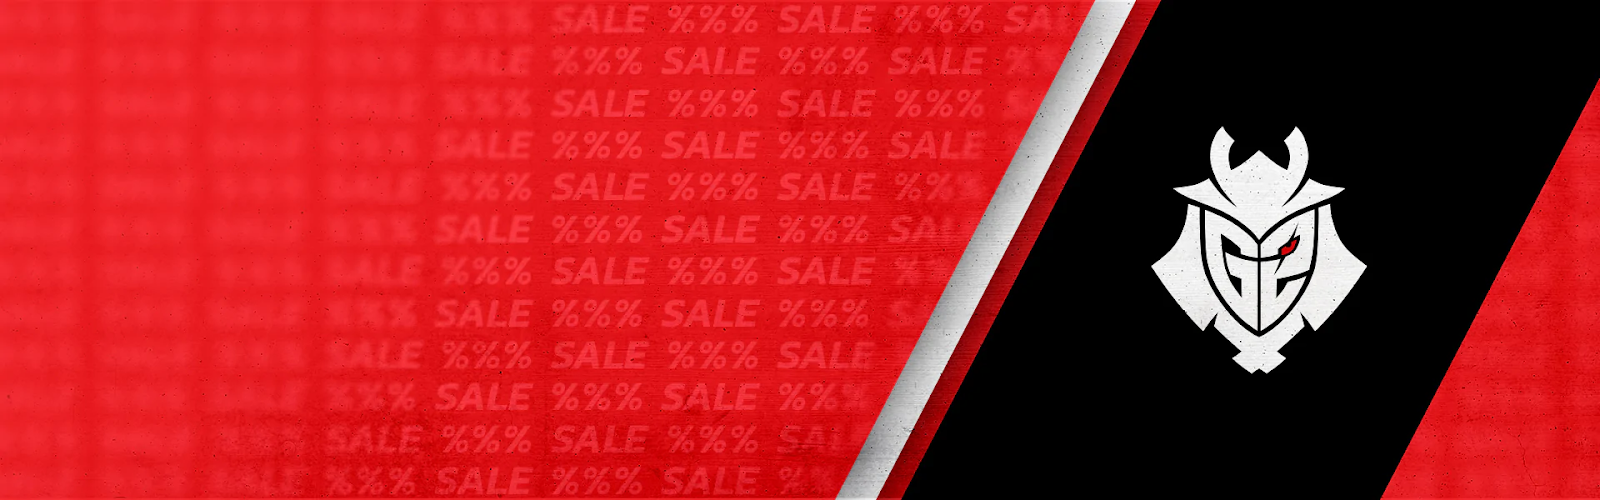 The G2 logo appears in white across a strip of black, on a red background with the word "sale" and percentage signs repeated across